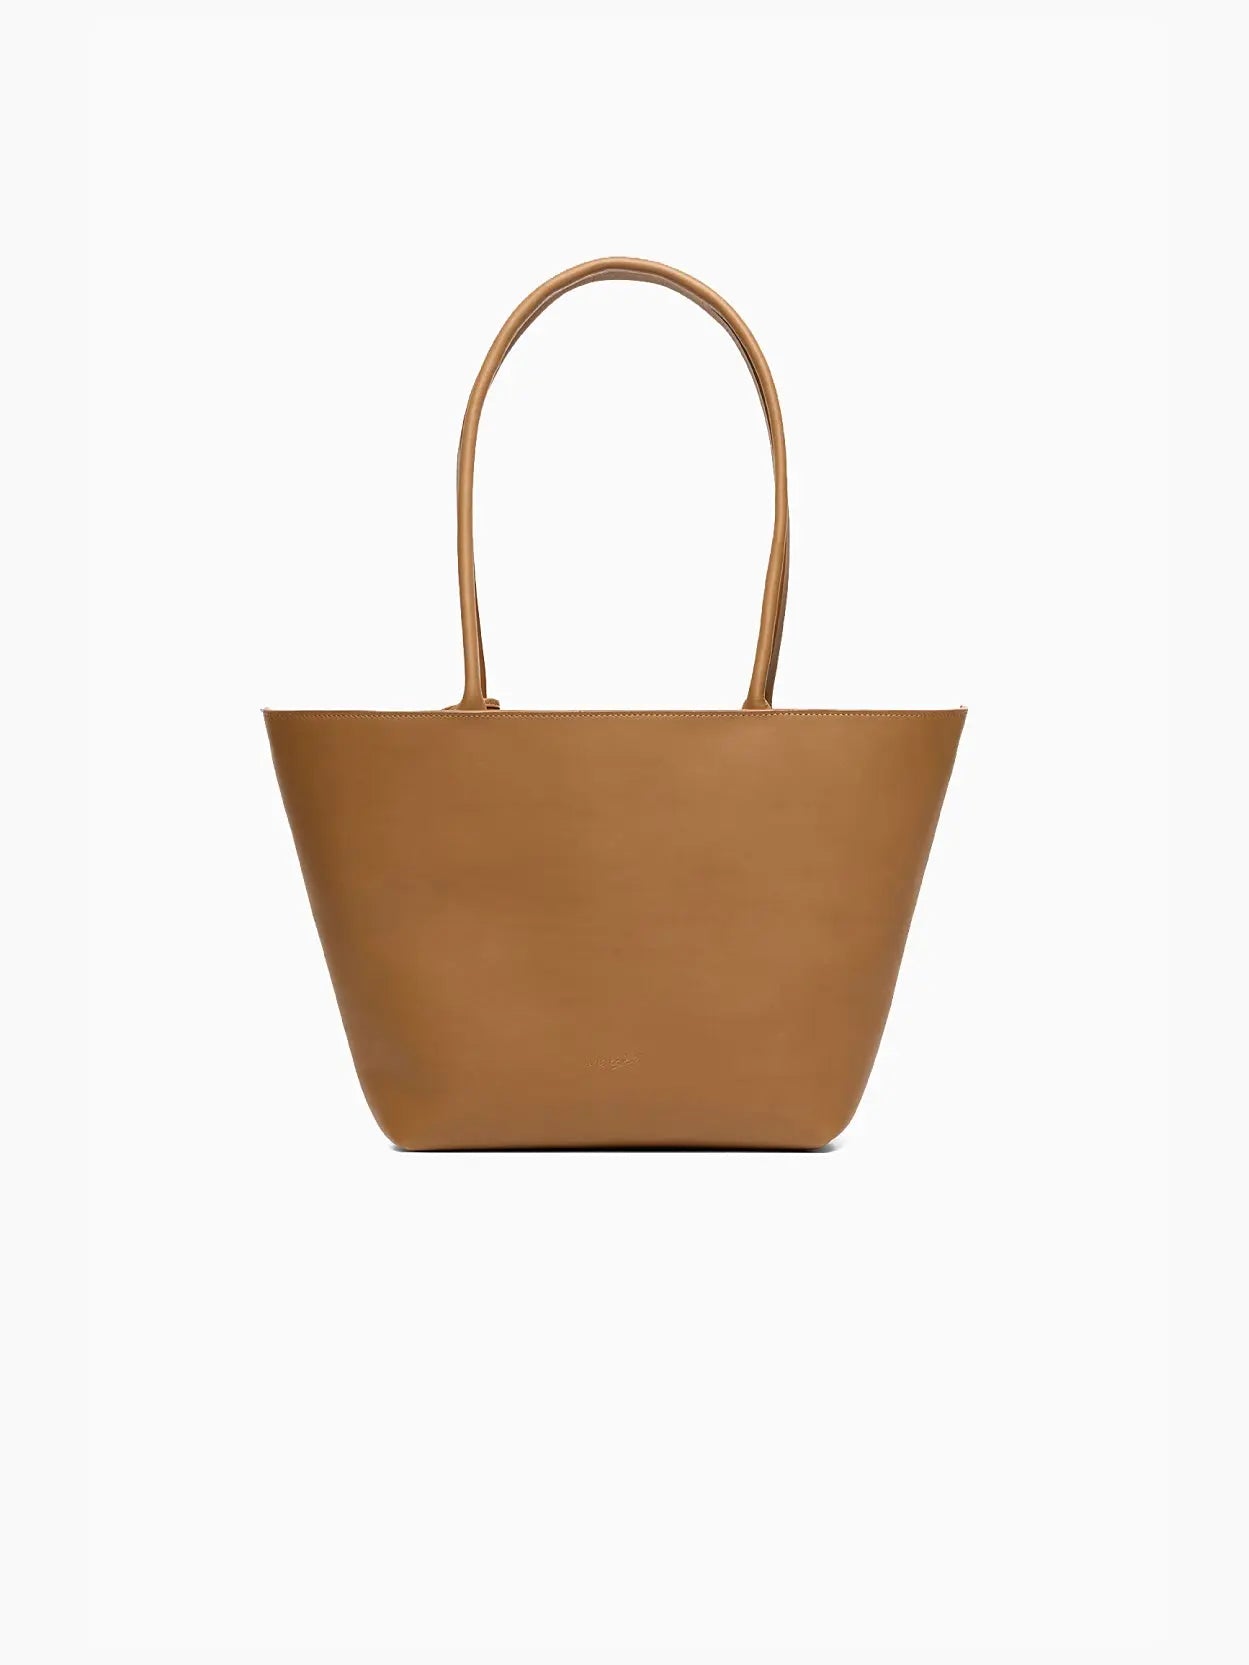 A Svasino Hand Bag Walnut with two long handles and a simple, minimalist design from Marsèll. The bag has a structured shape with a slightly trapezoidal form, featuring no visible embellishments or logos. The background is plain white, emphasizing the elegance of this Barcelona-inspired piece.